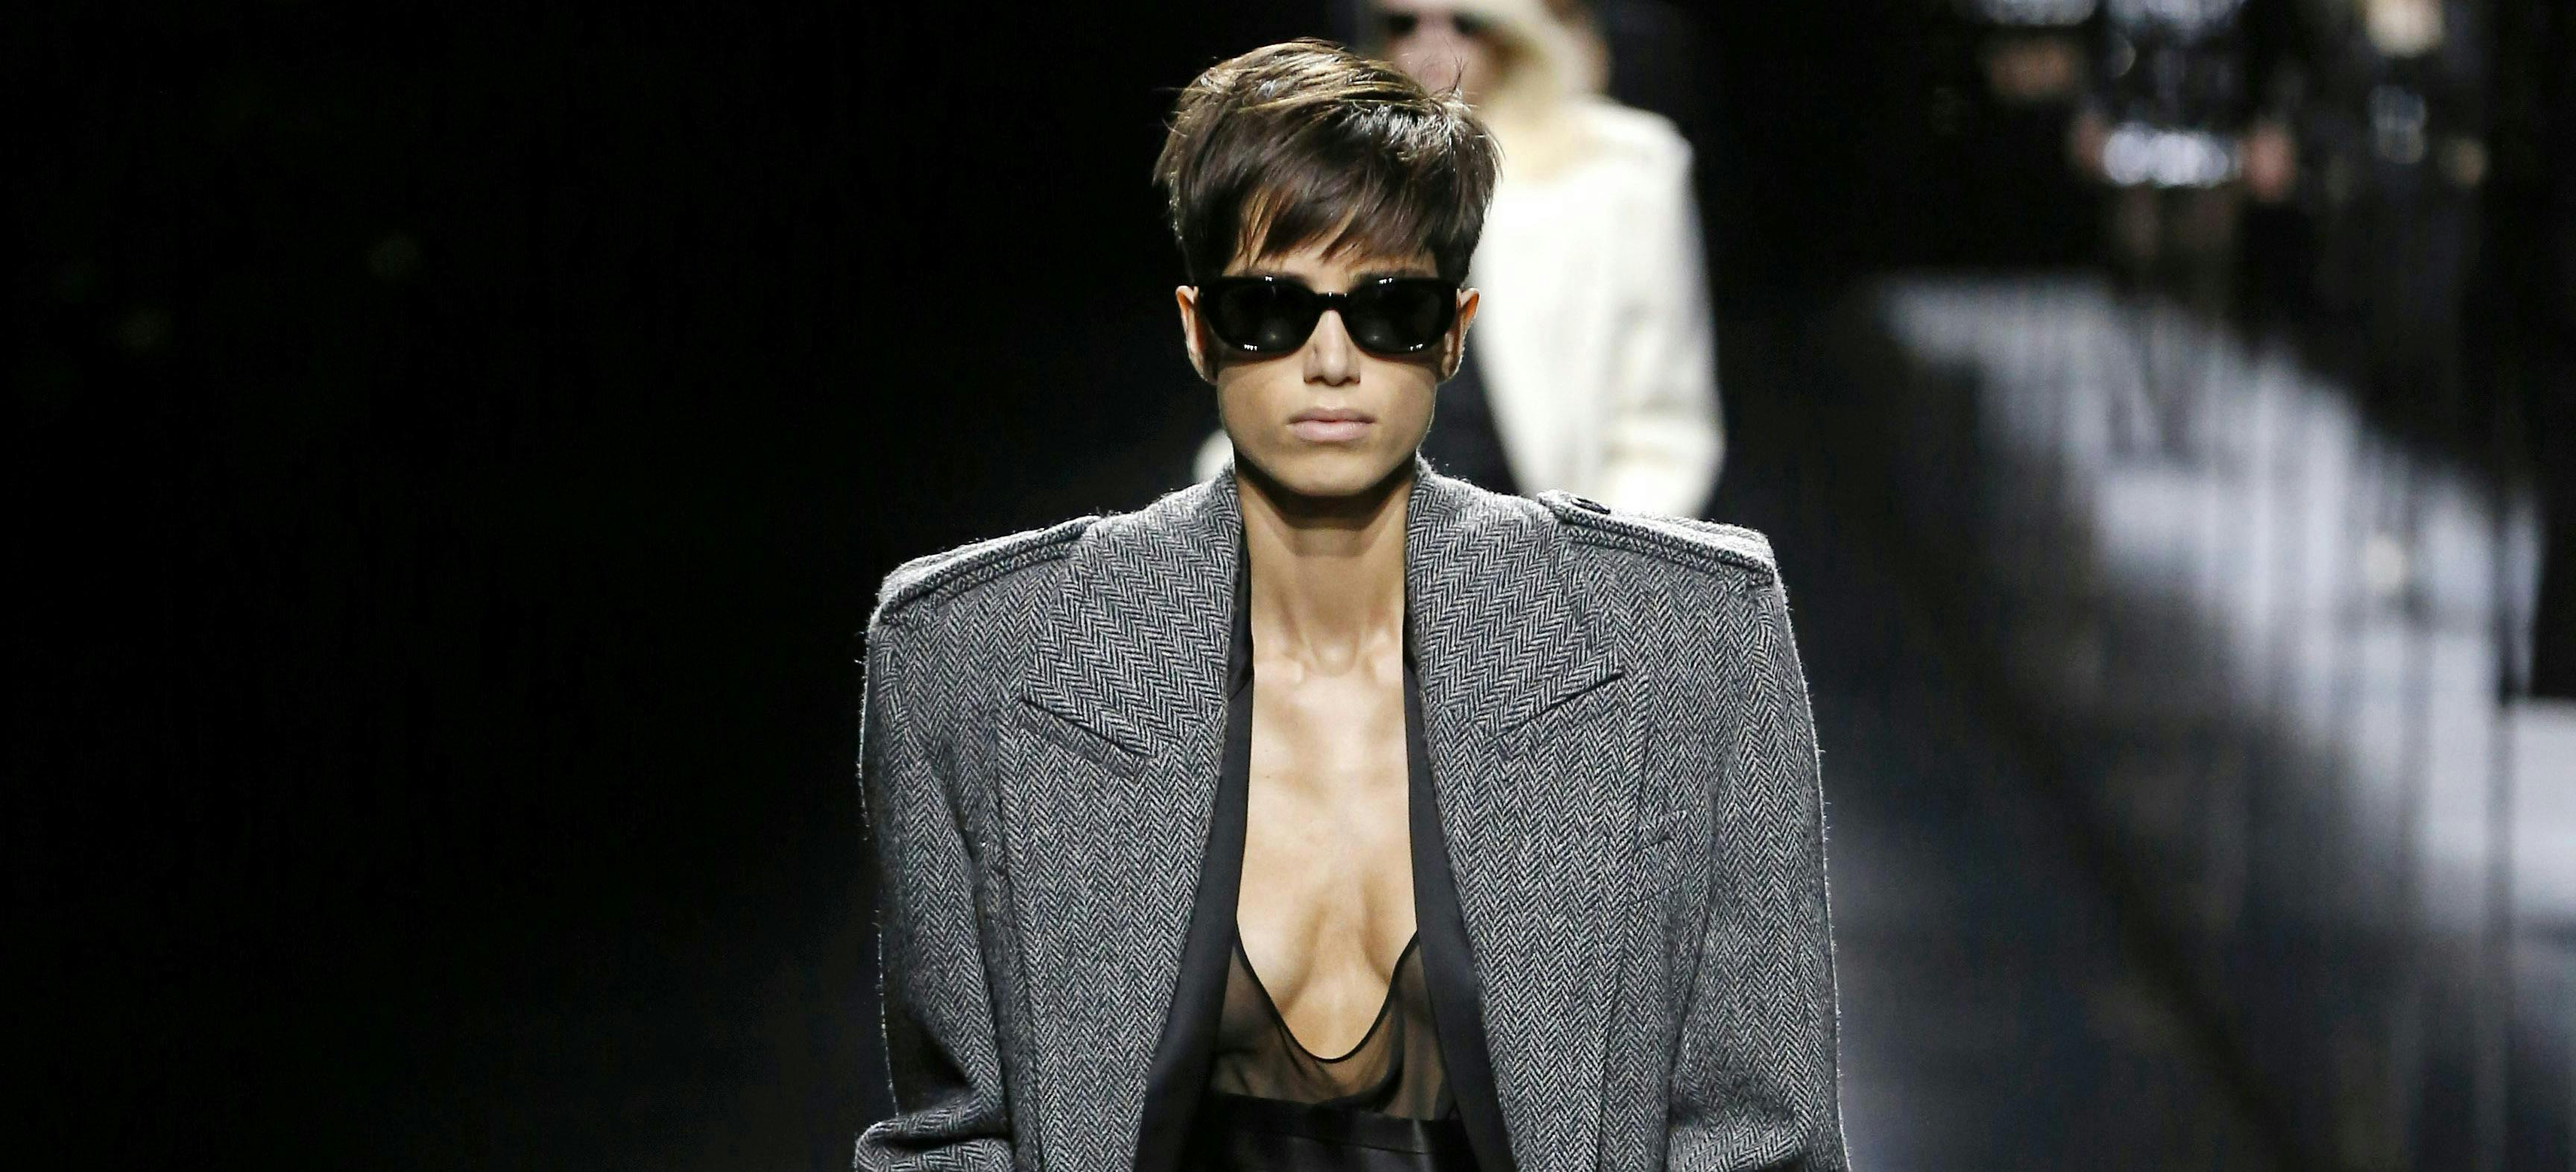 saint laurent. rtw fall winter 2019-20 _ paris february march 2019_ person human sunglasses accessories accessory sleeve clothing apparel